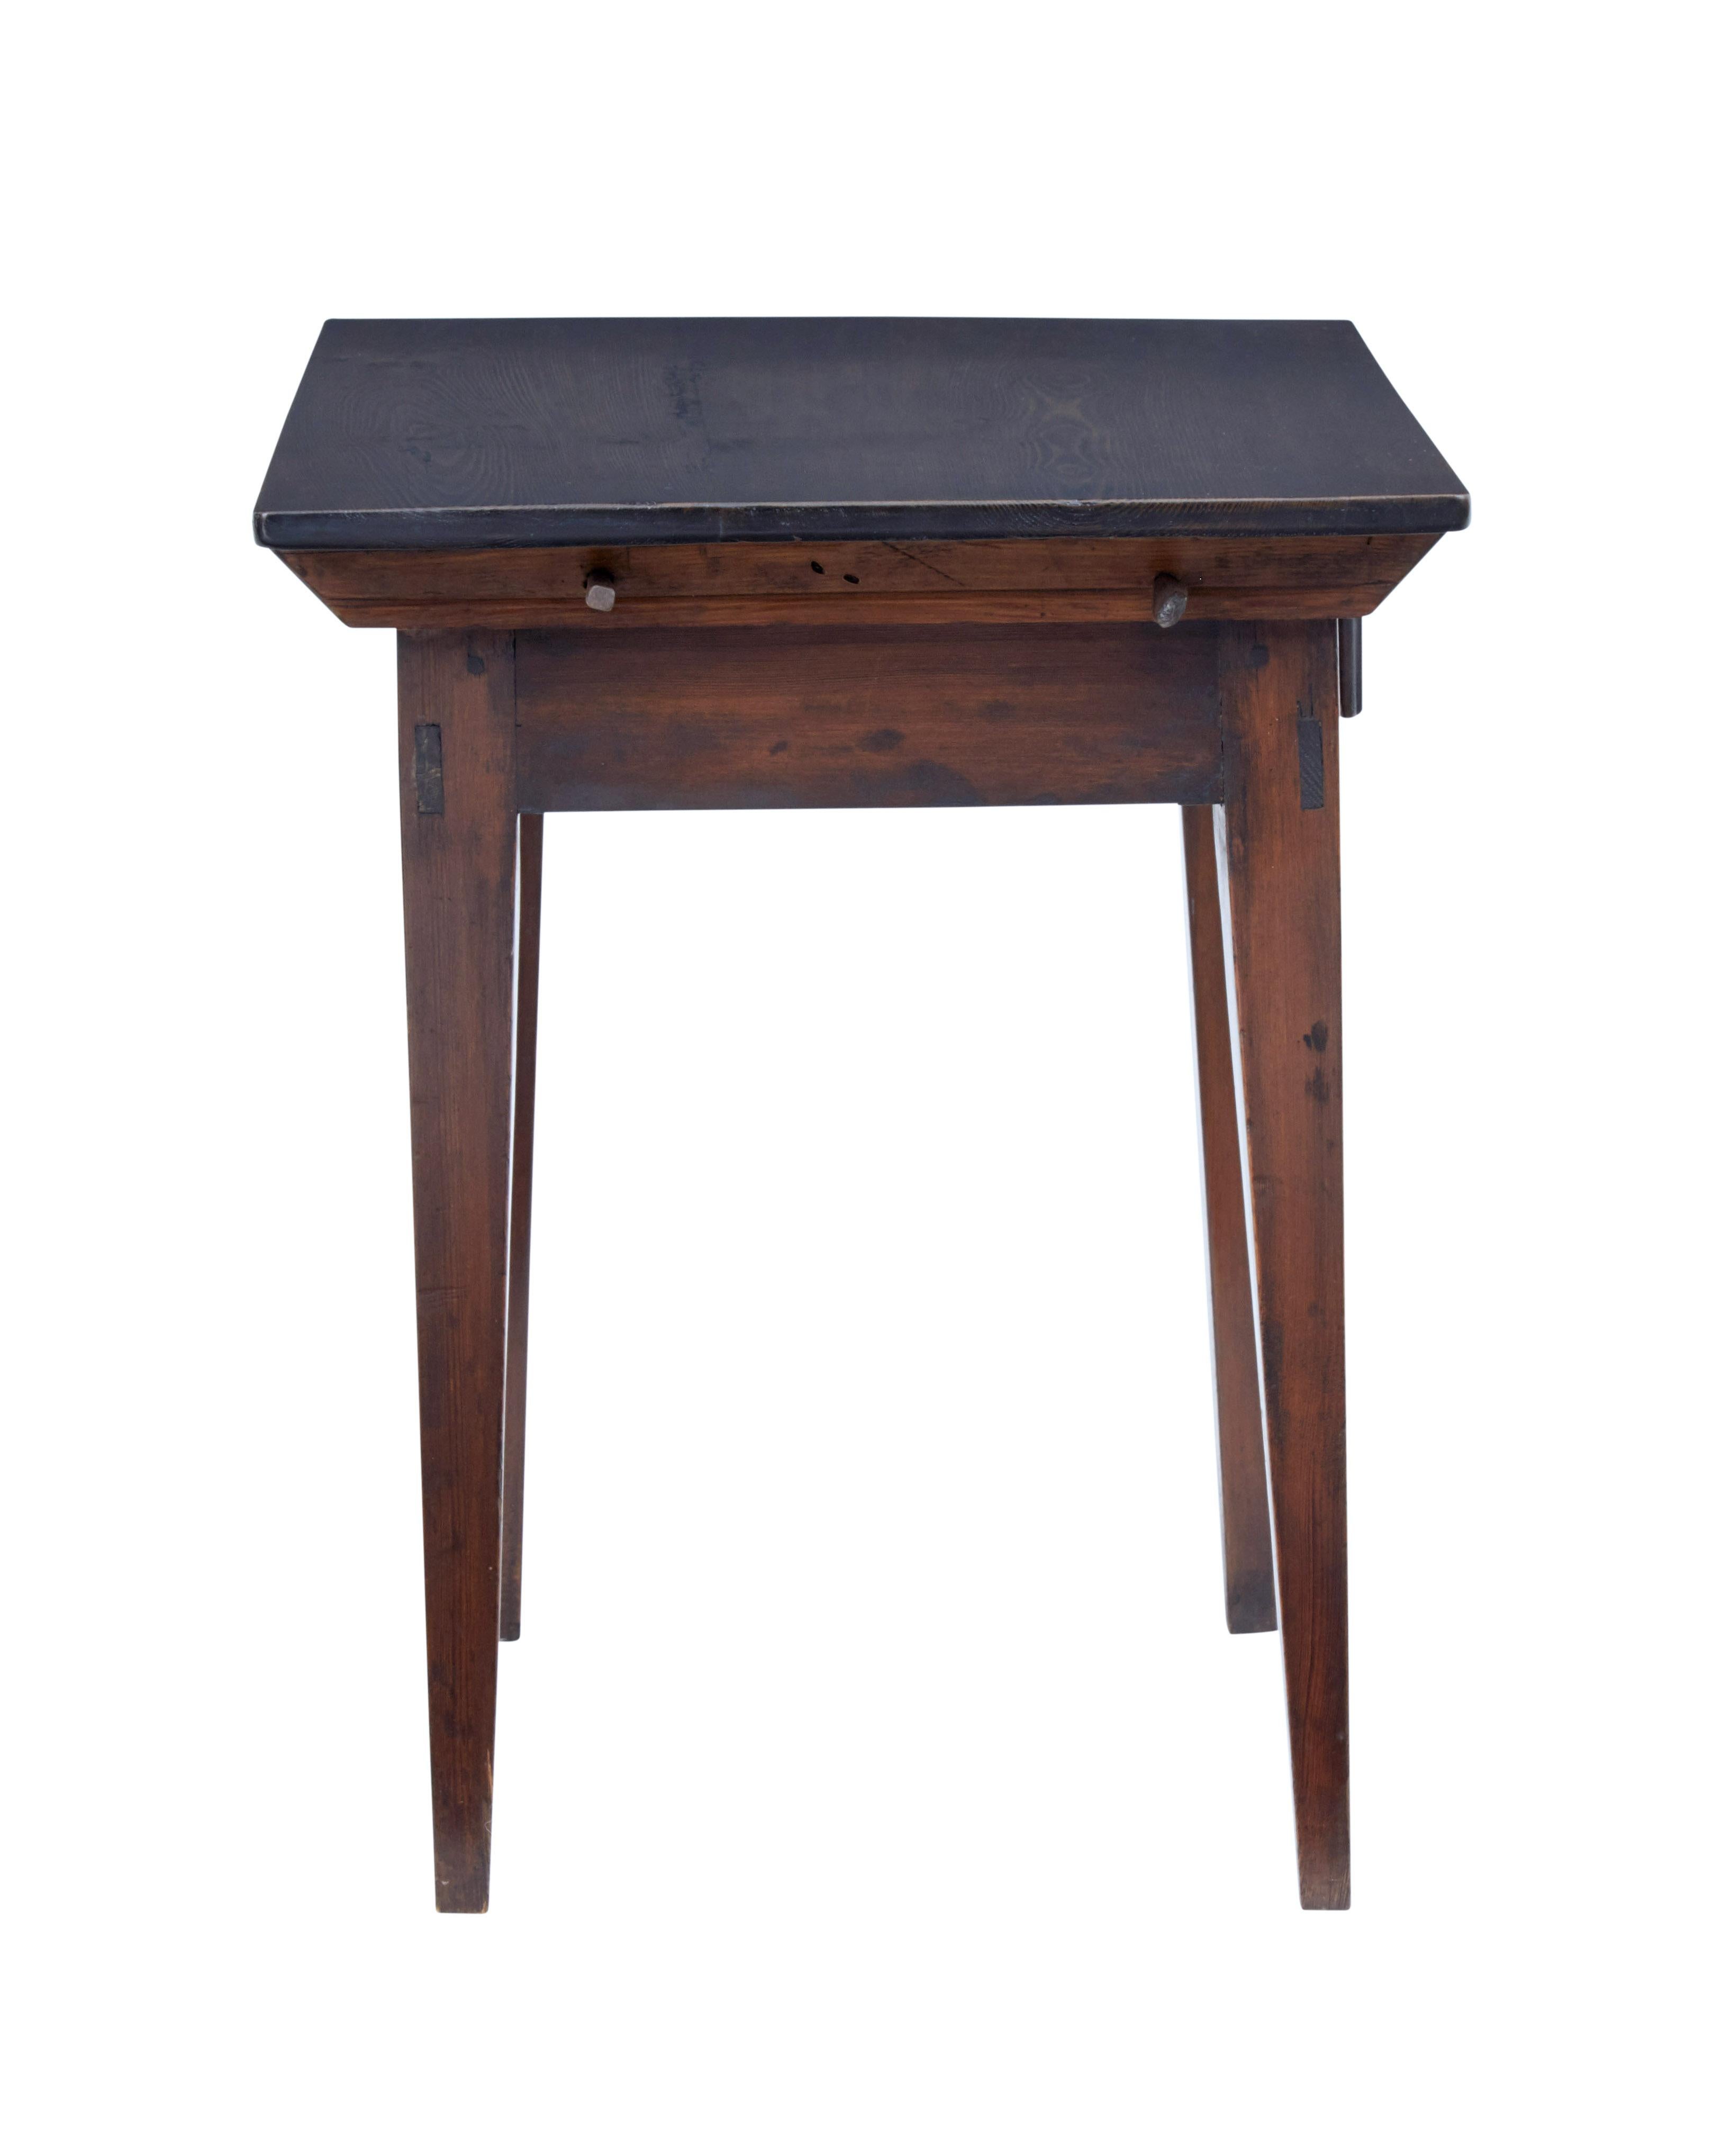 19th Century Swedish Pine Stained Side Table (Schwedisch)